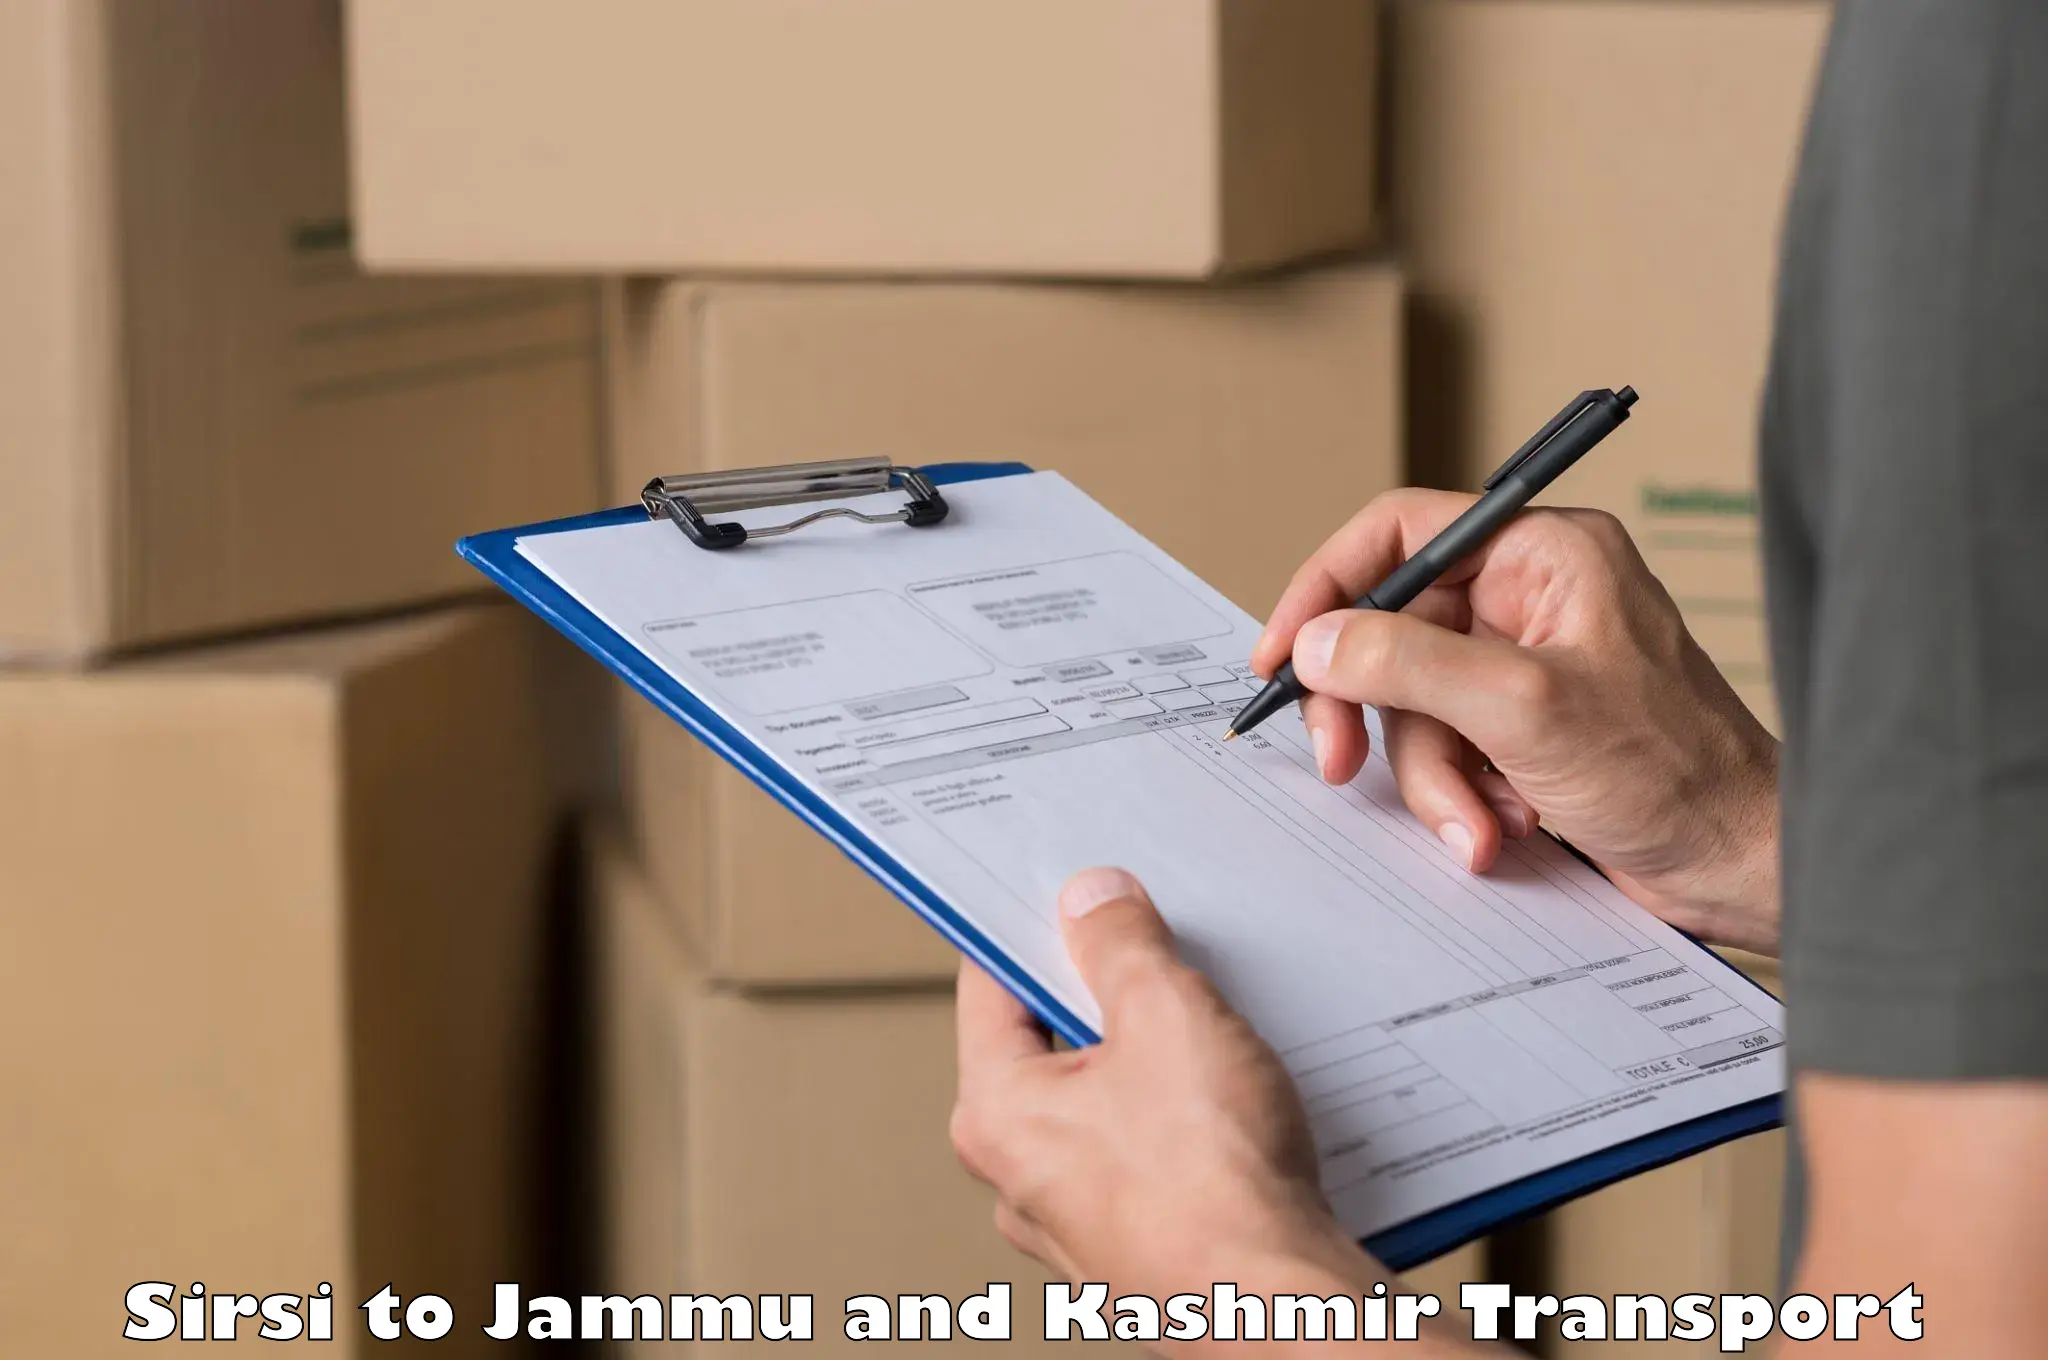 Cargo train transport services Sirsi to Jammu and Kashmir